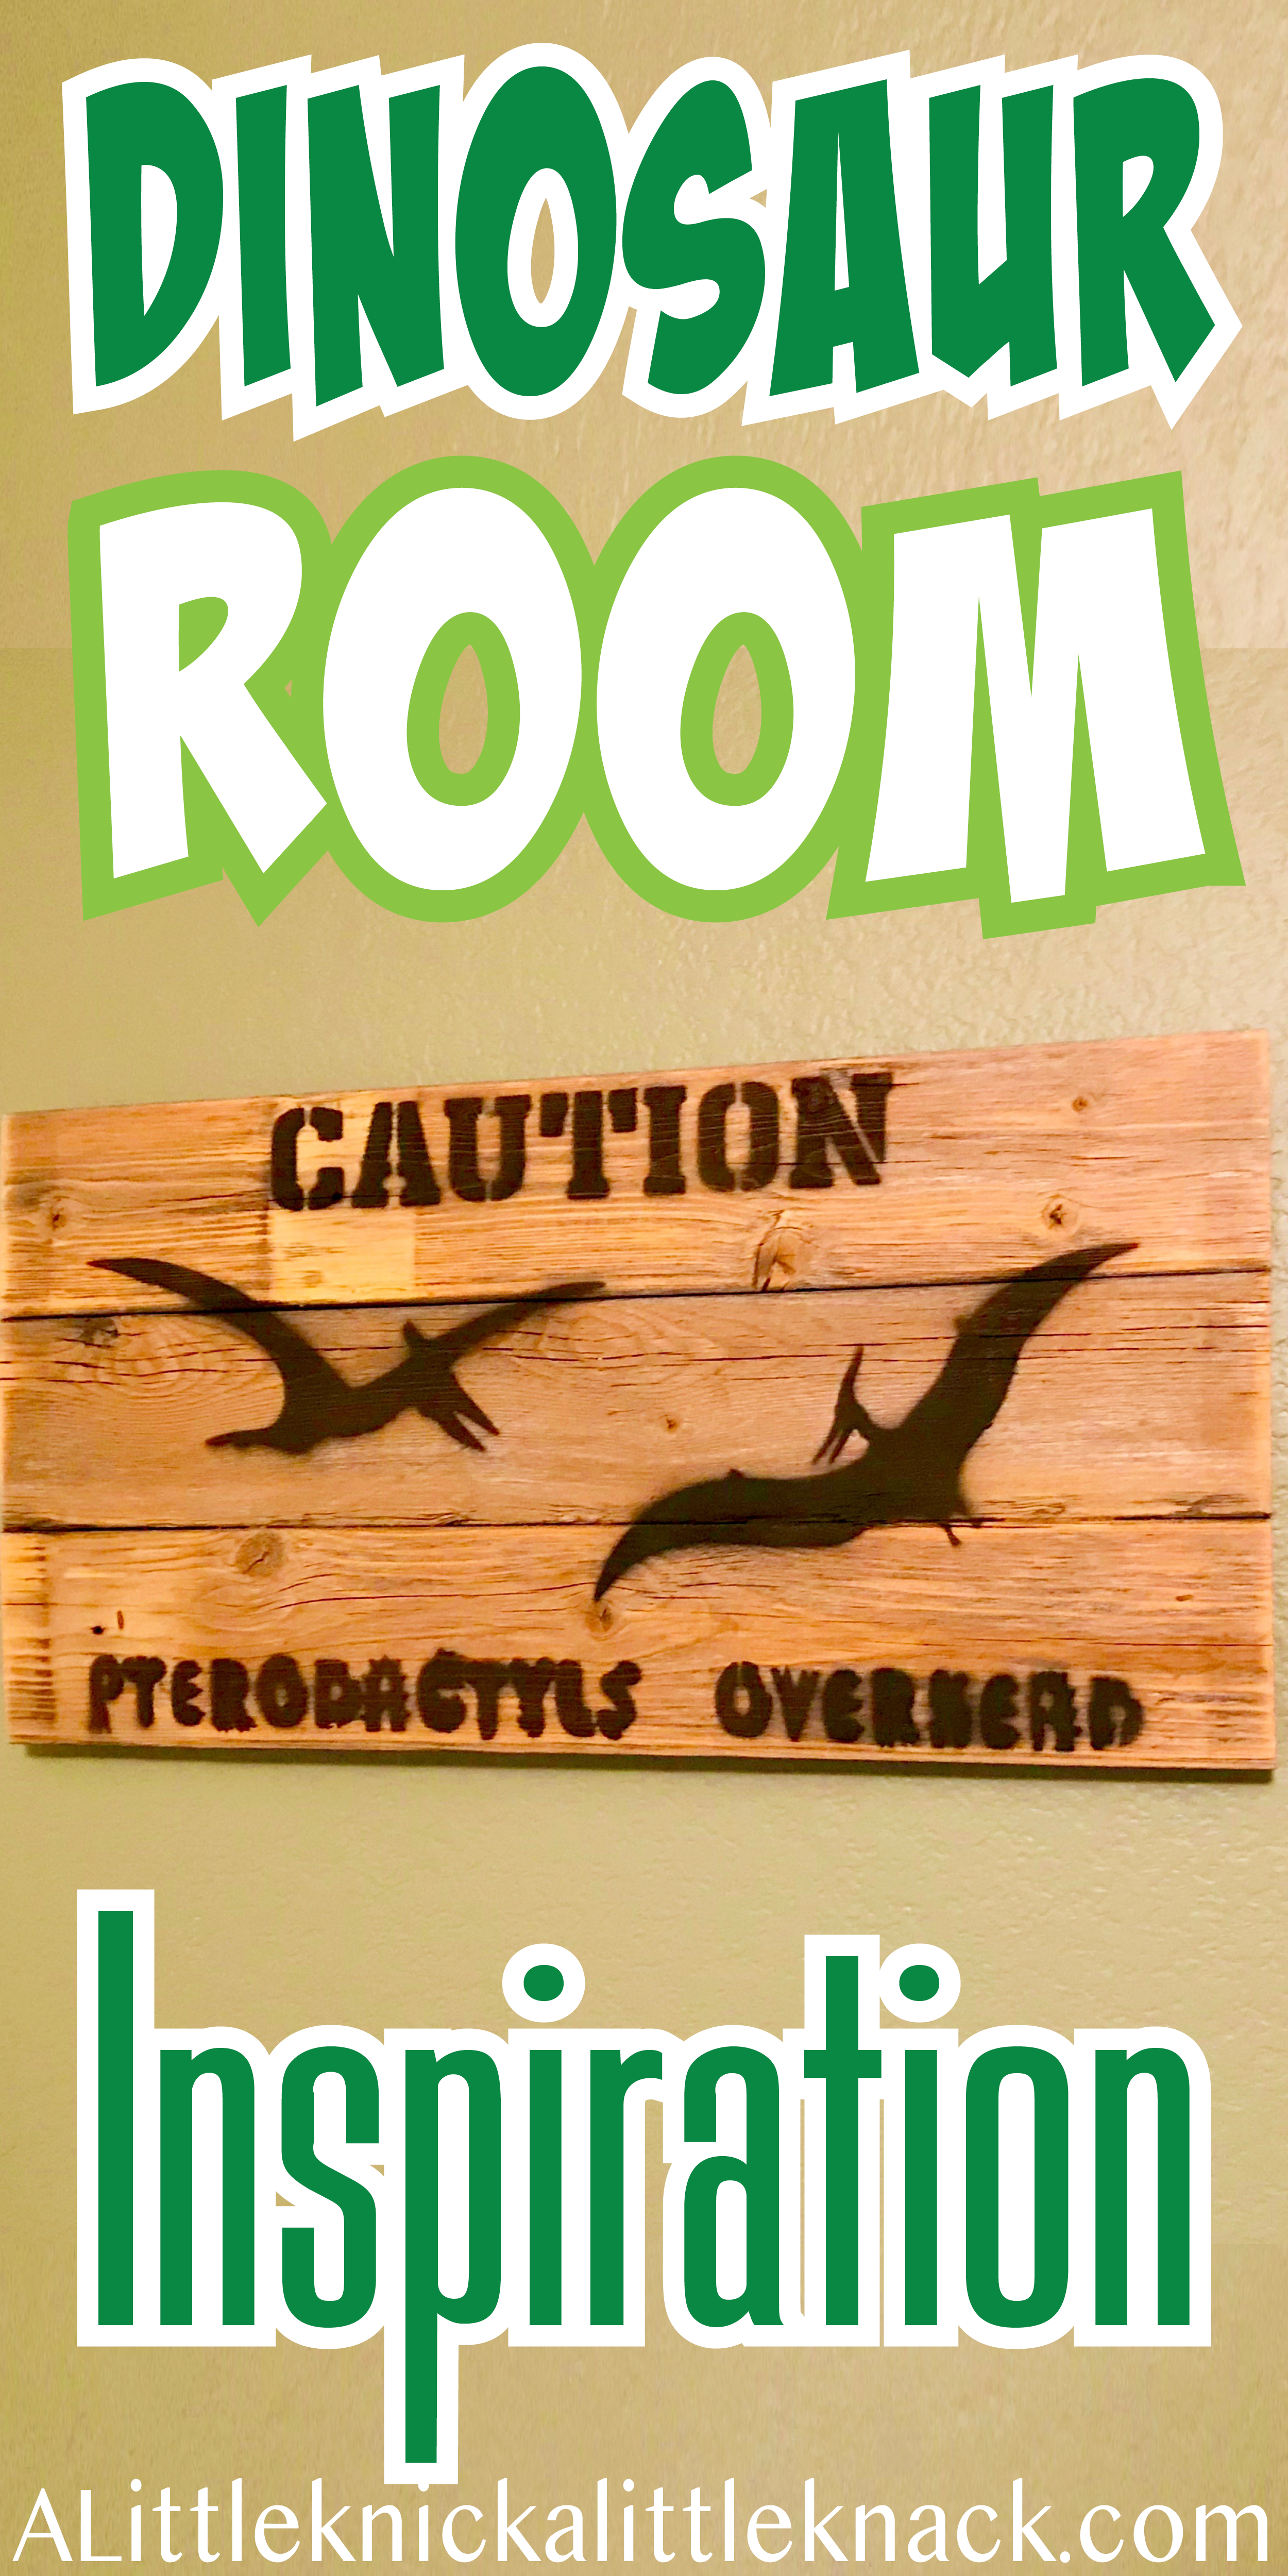 A rustic wood sign with pterodactyls and a text overlay 